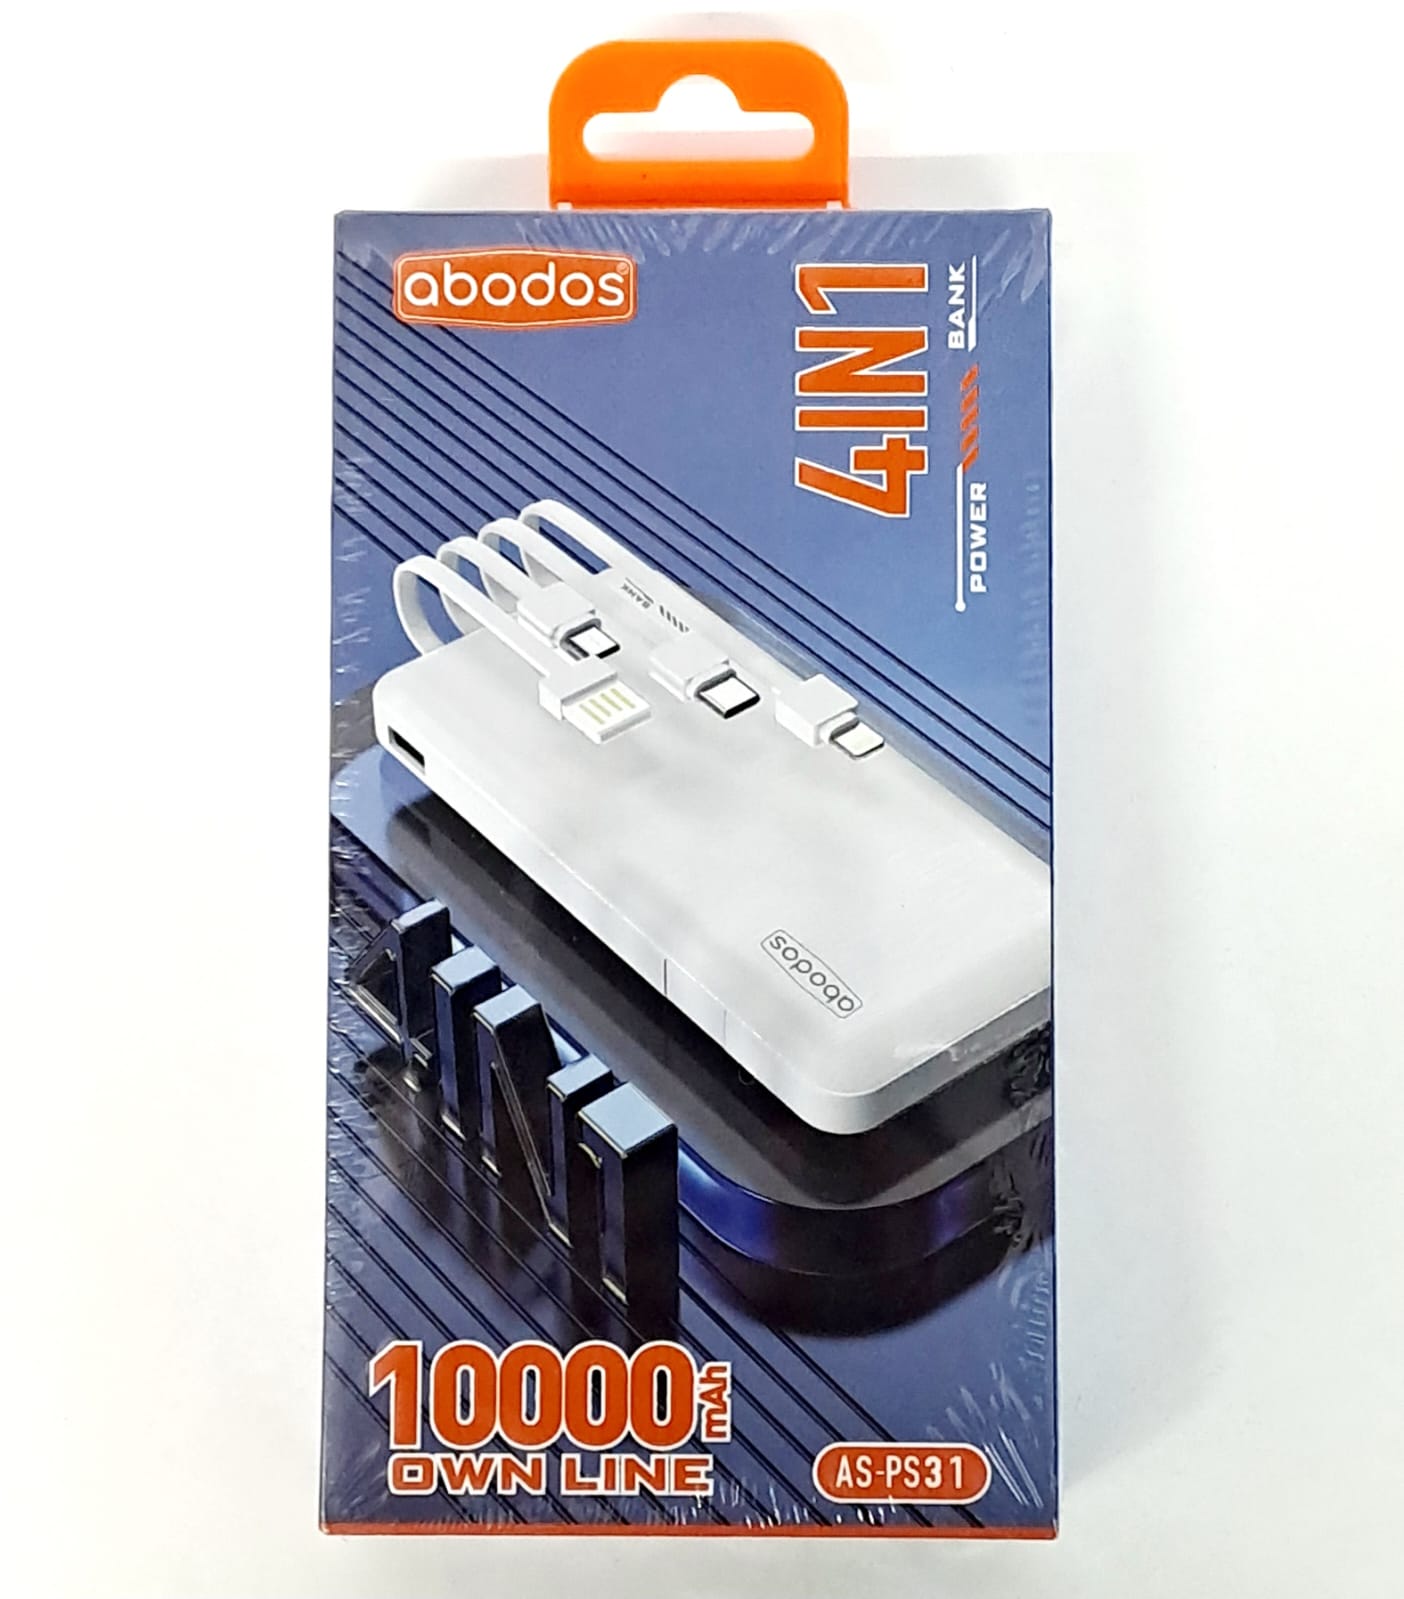 AS-PS31 abodos 4 in 1 Power Bank 10000mAh